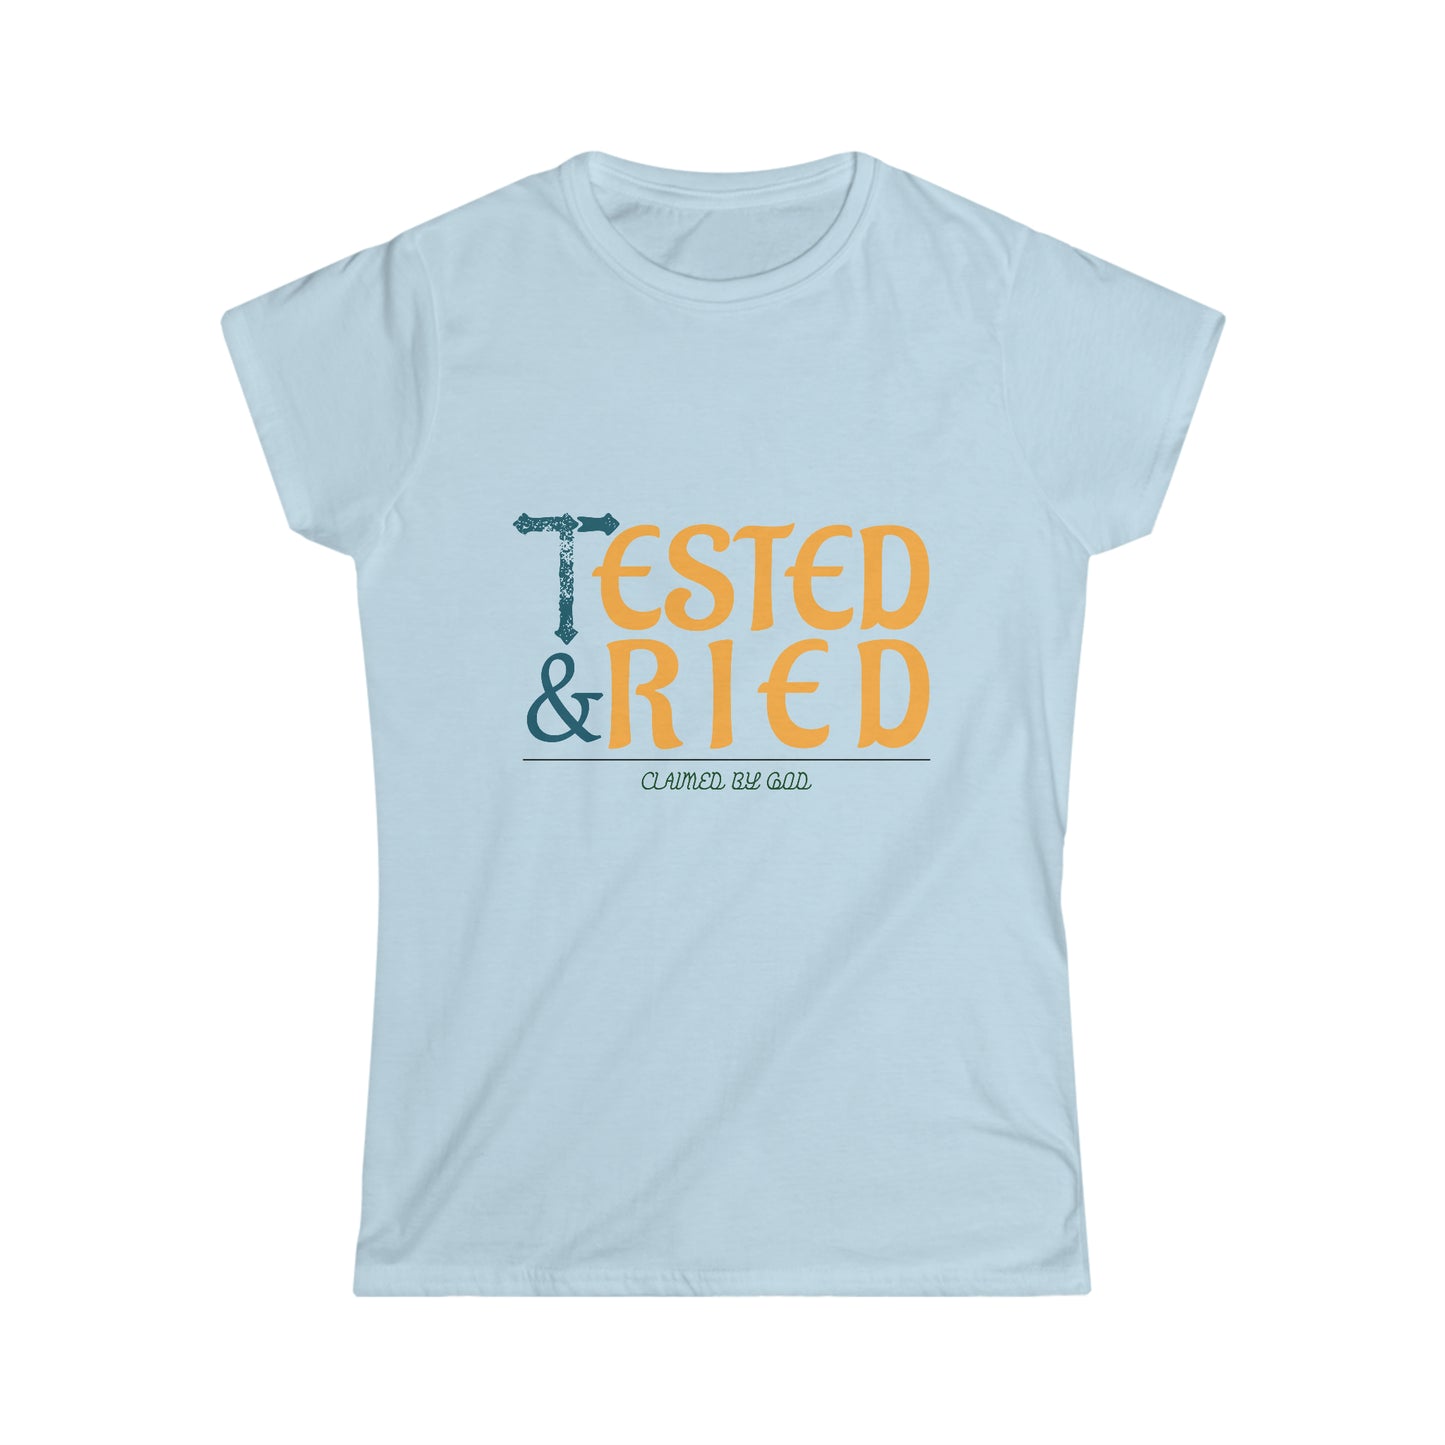 Tested and tried Women's T-shirt